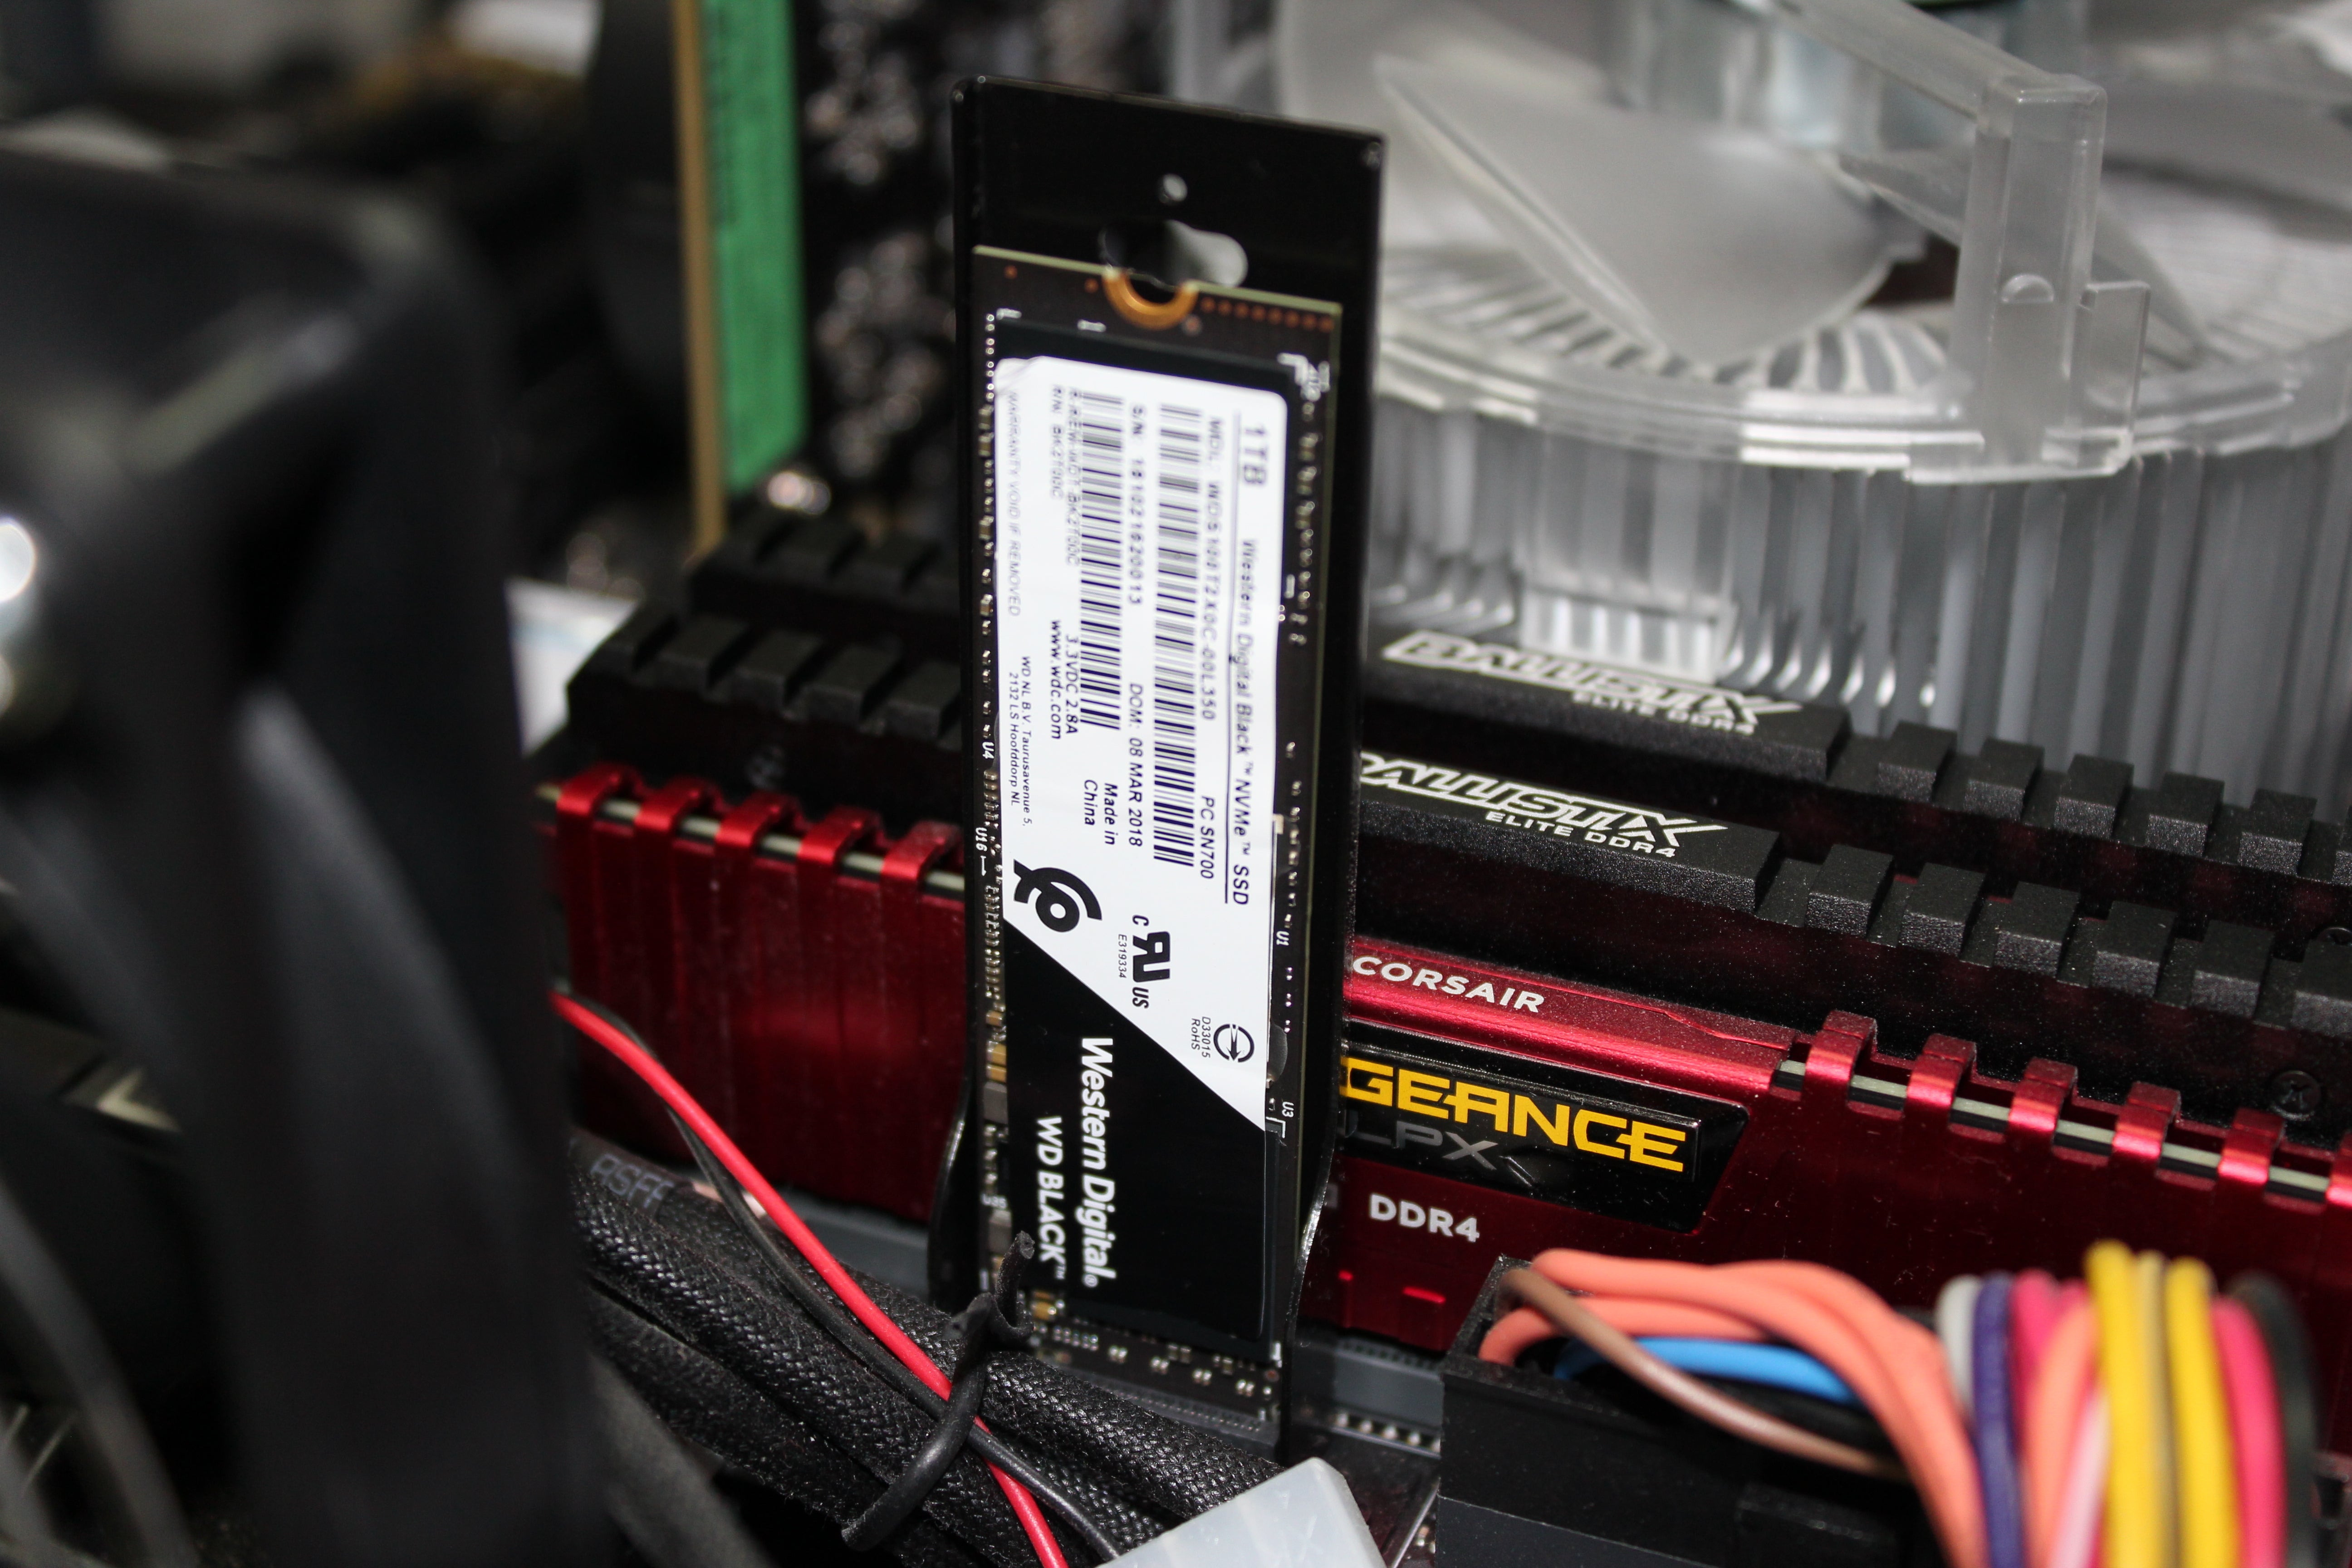 NVMe SSDs, the insanely fast storage you want in your PC